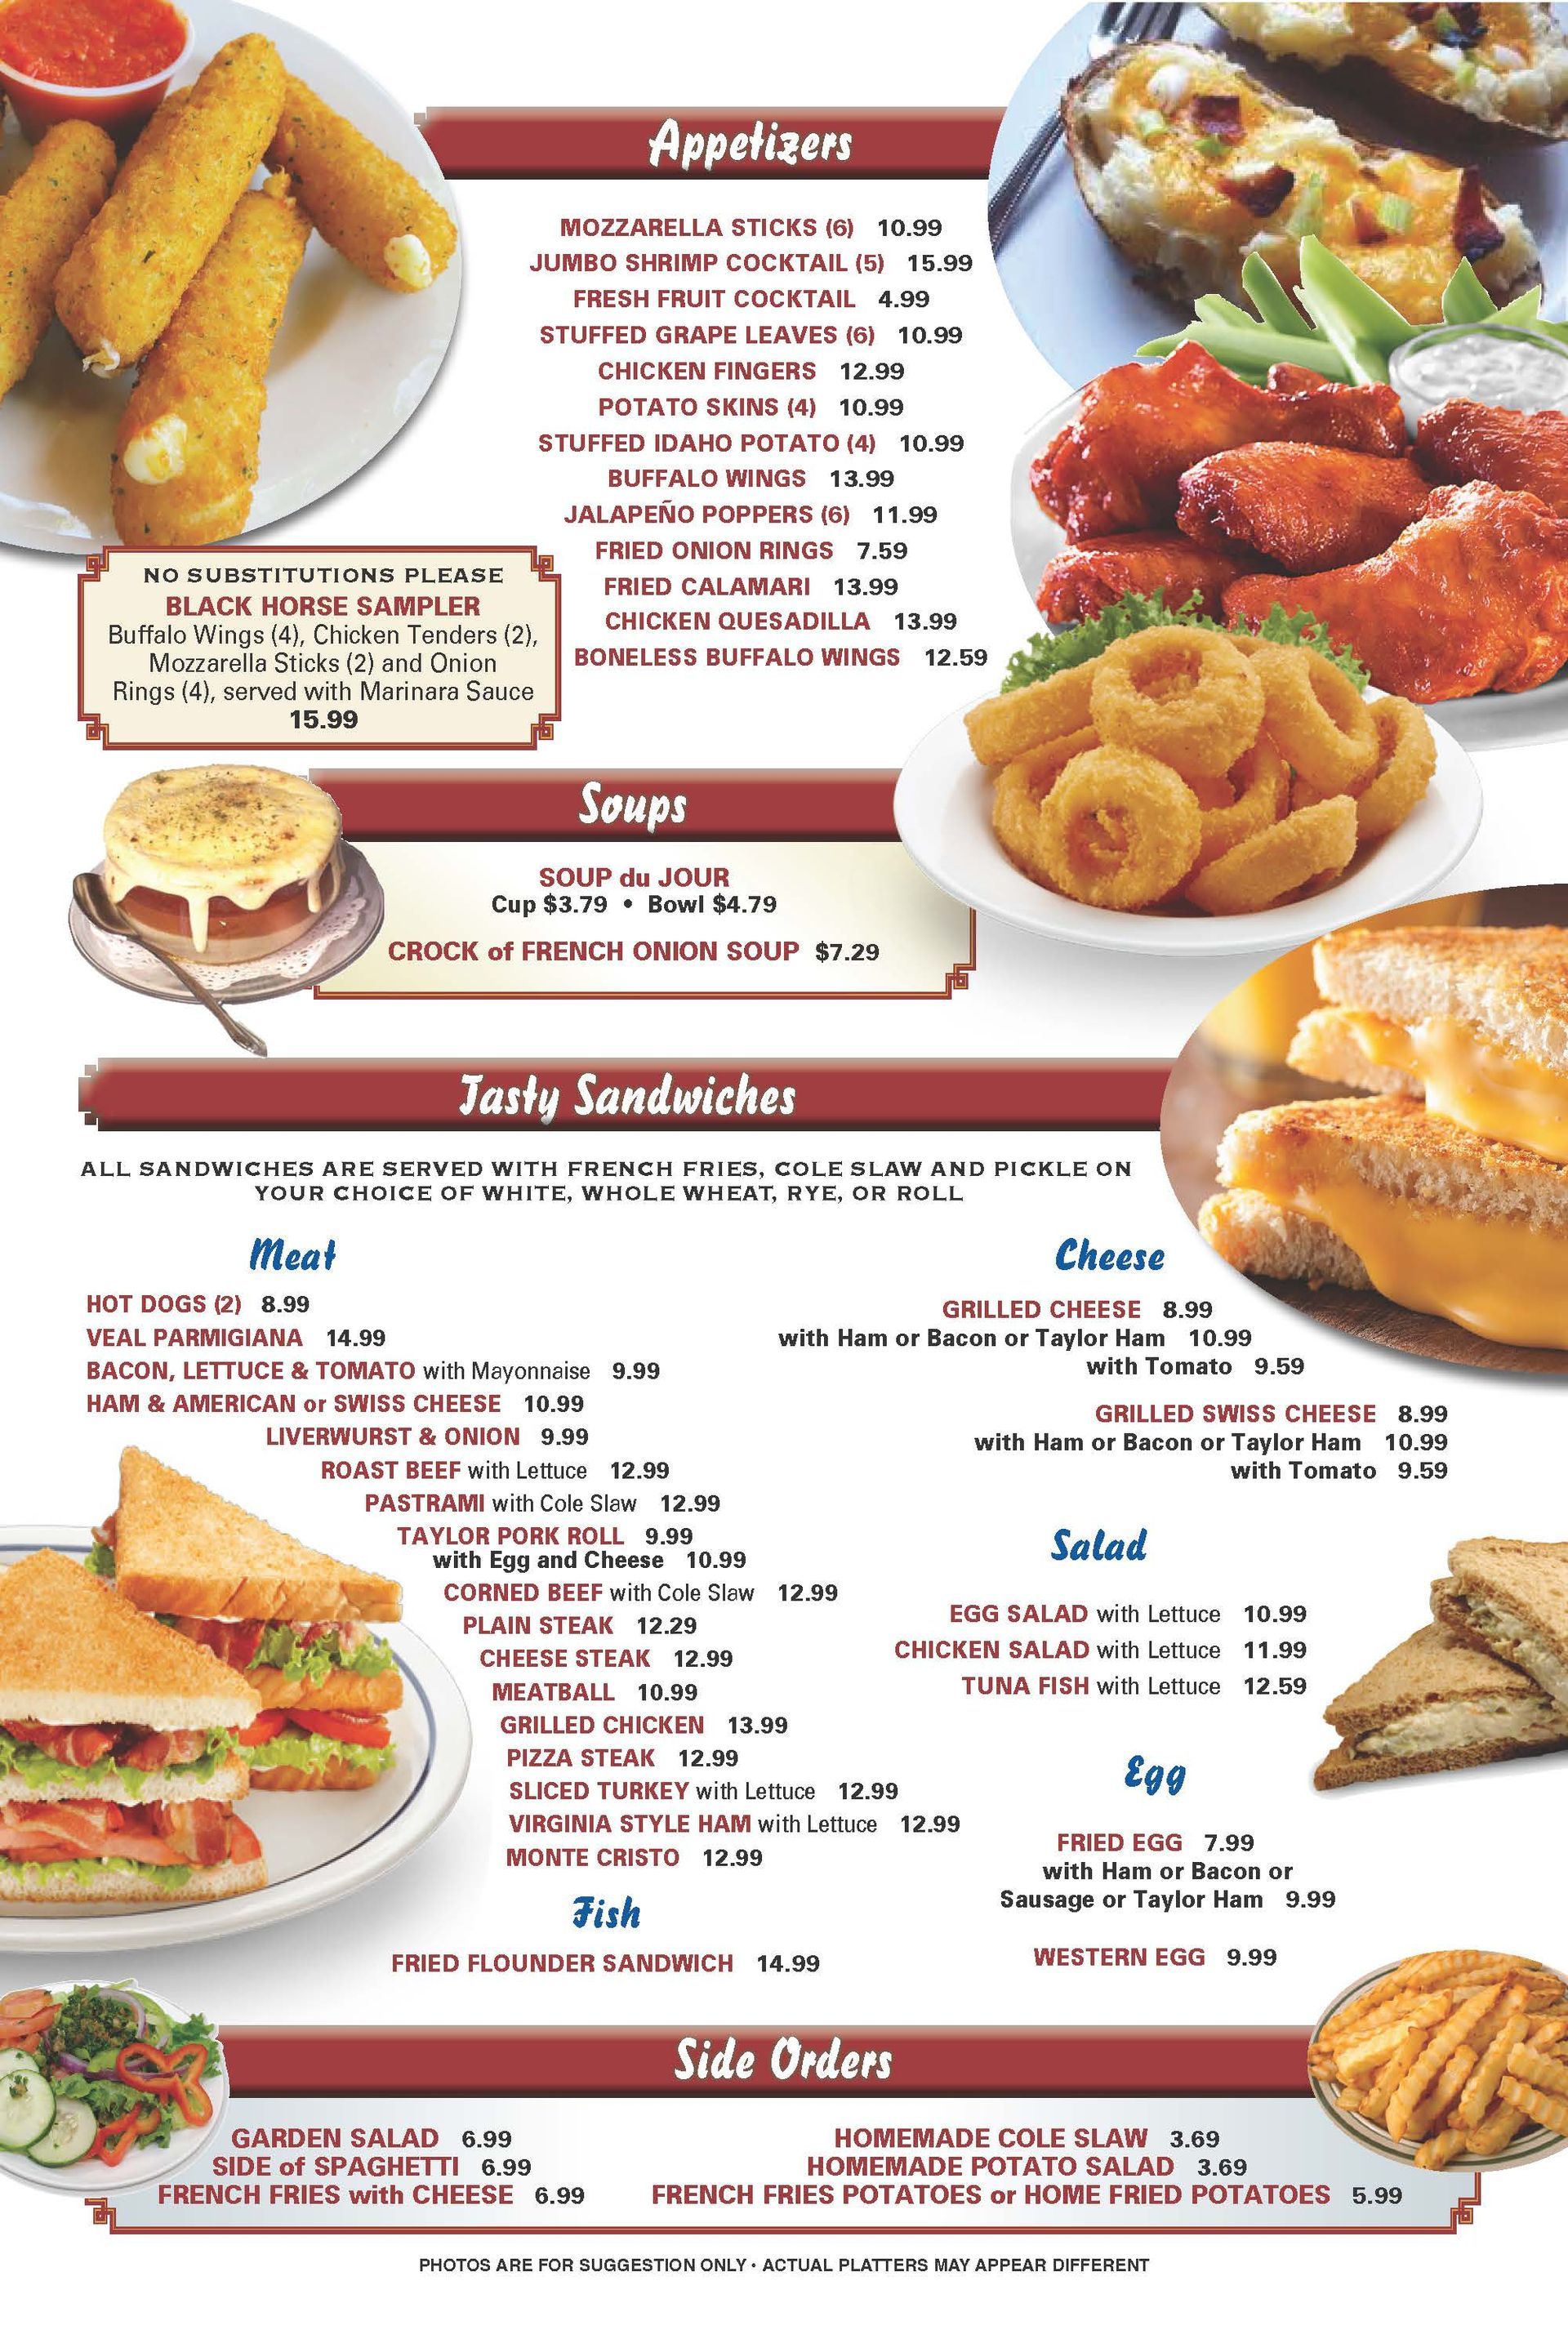 a menu for a restaurant shows appetizers soups and tasty sandwiches — The Black Horse Breakfast in Ephraim, NJ